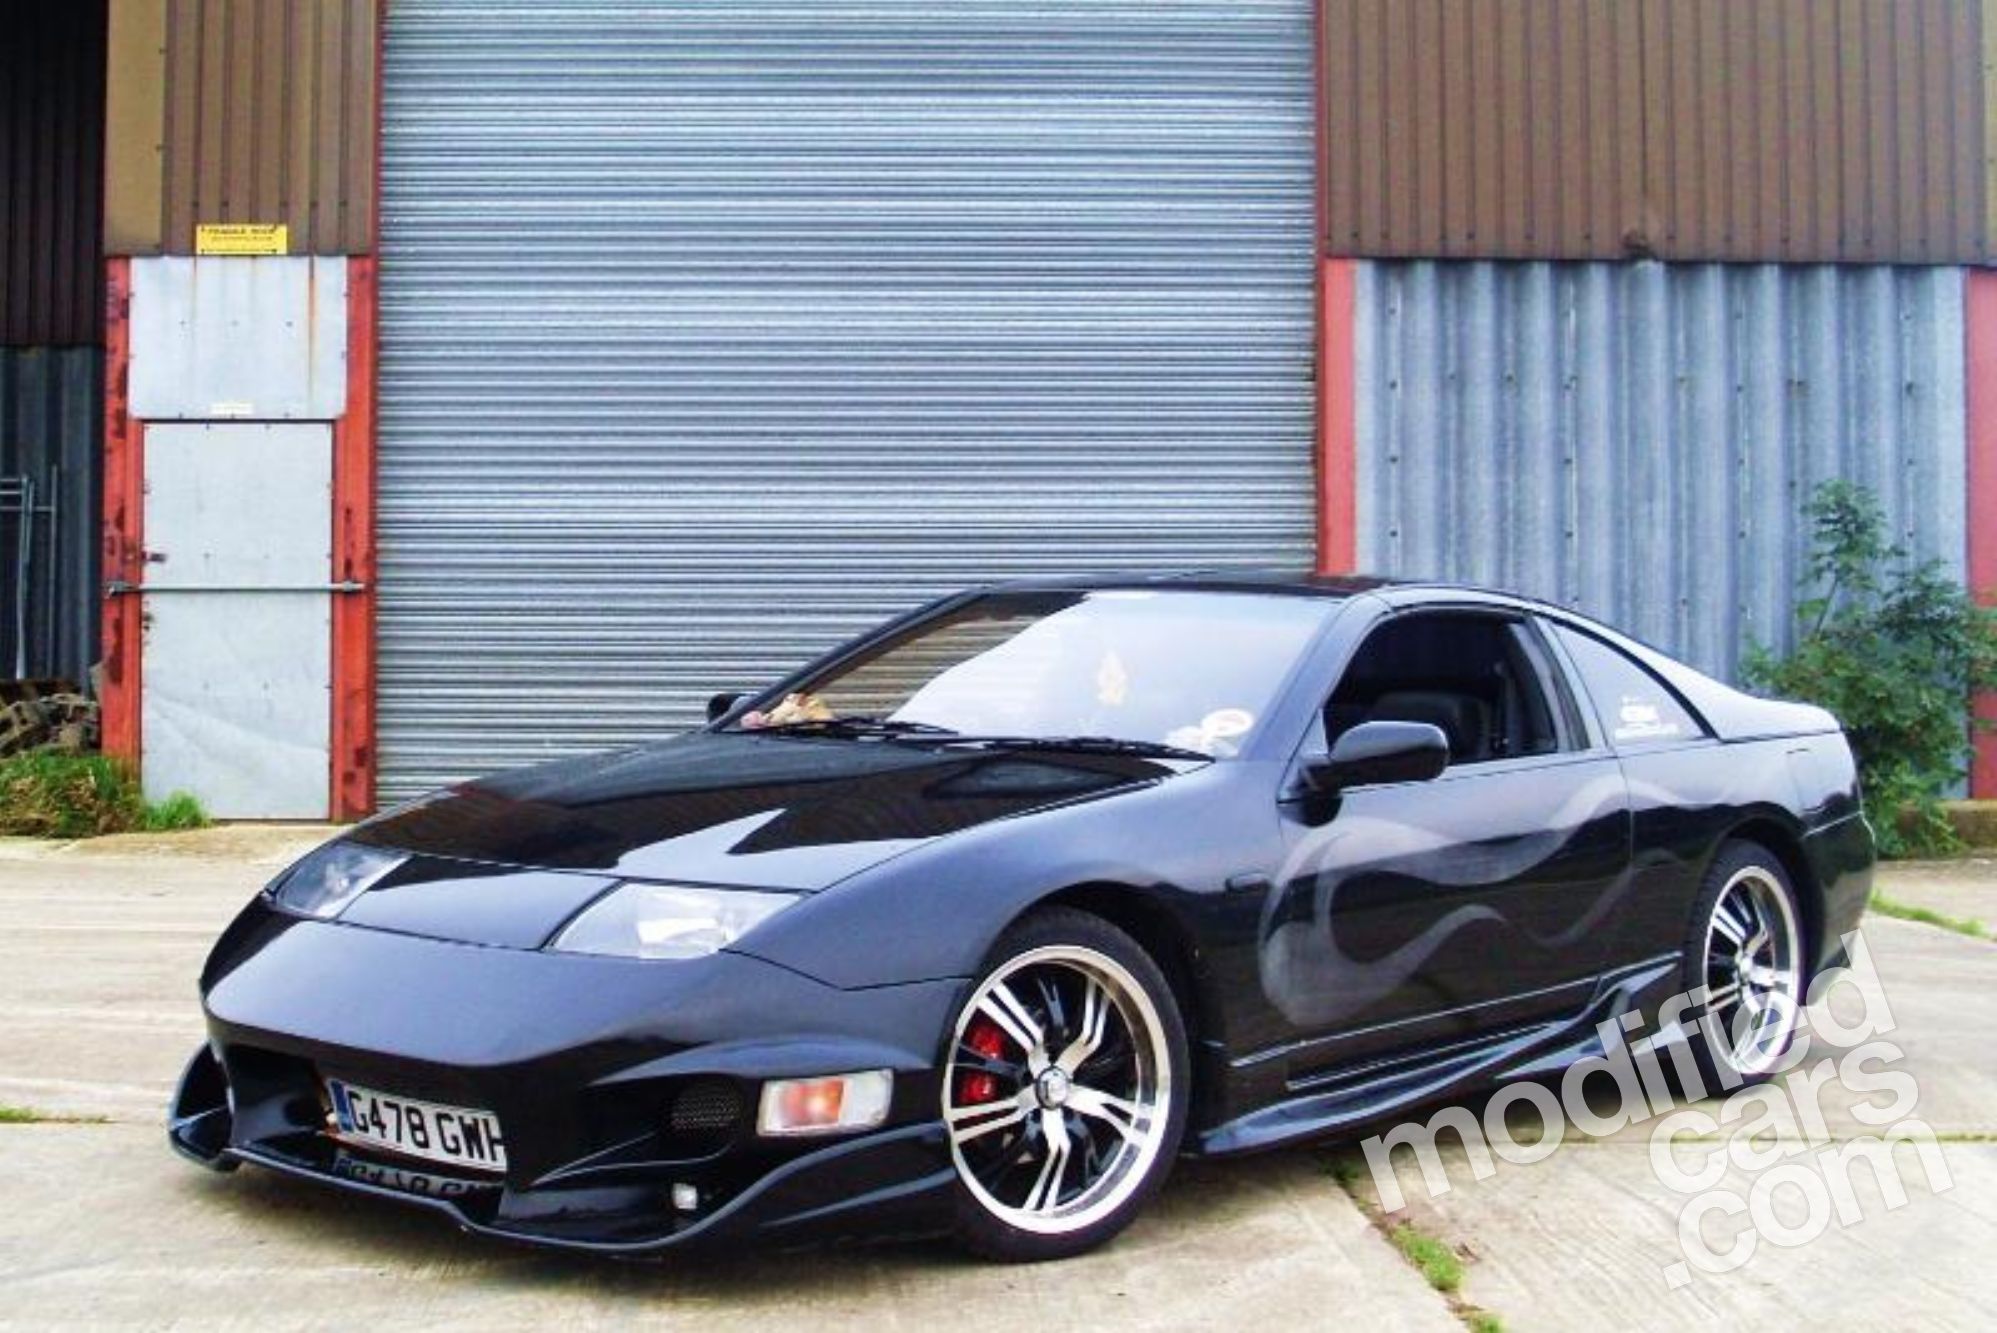 Nissan 300zx twin turbo review #5